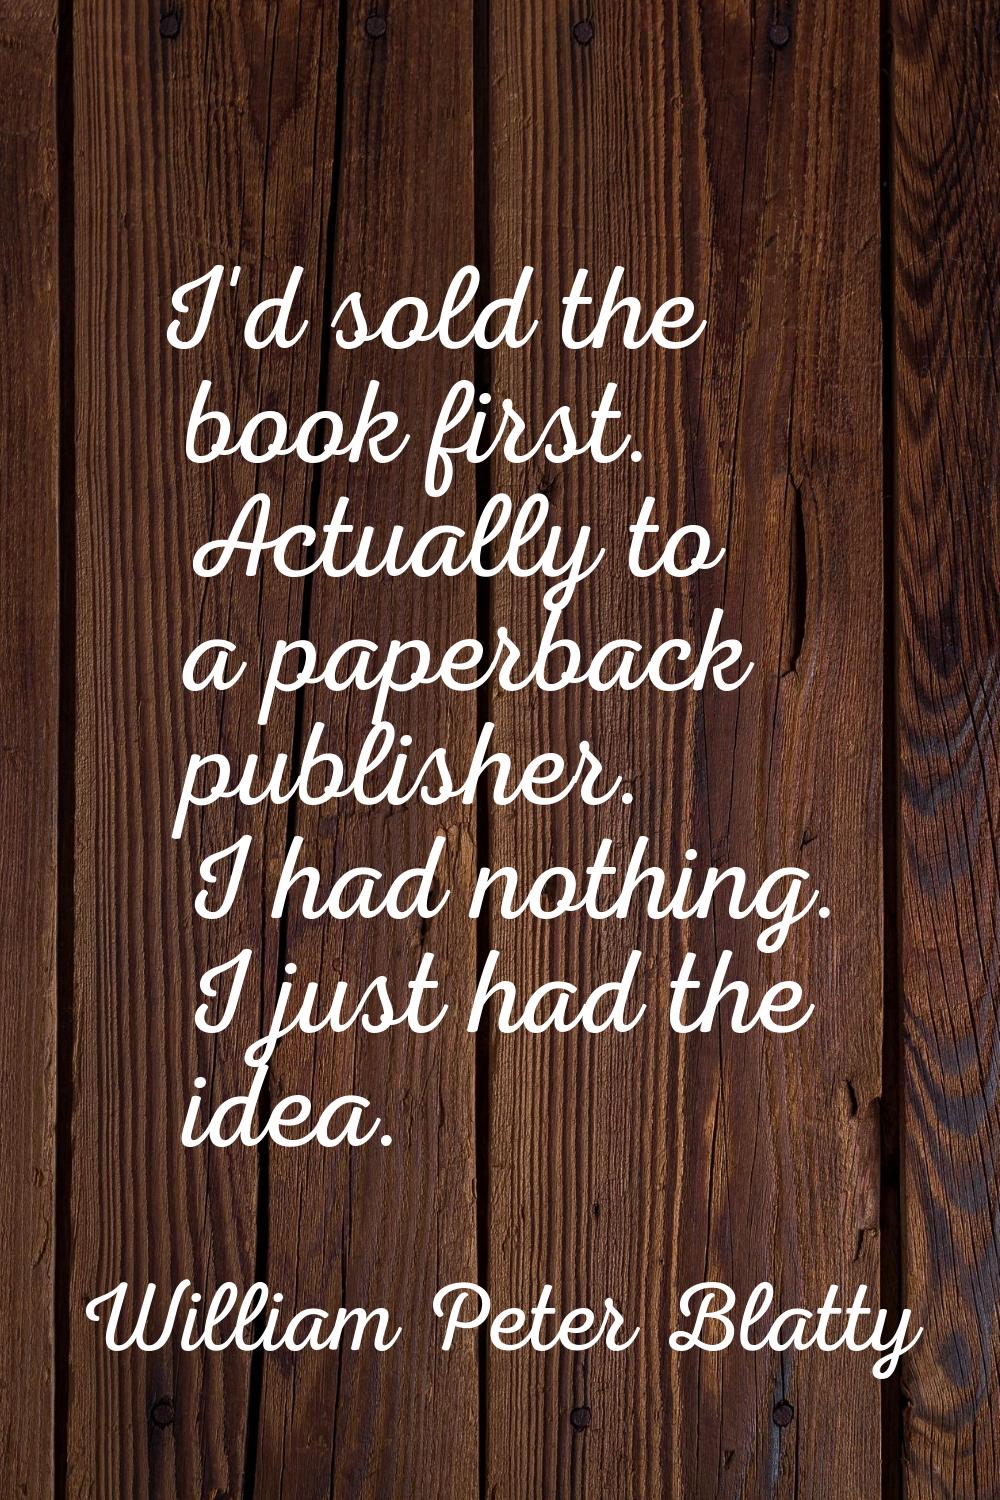 I'd sold the book first. Actually to a paperback publisher. I had nothing. I just had the idea.